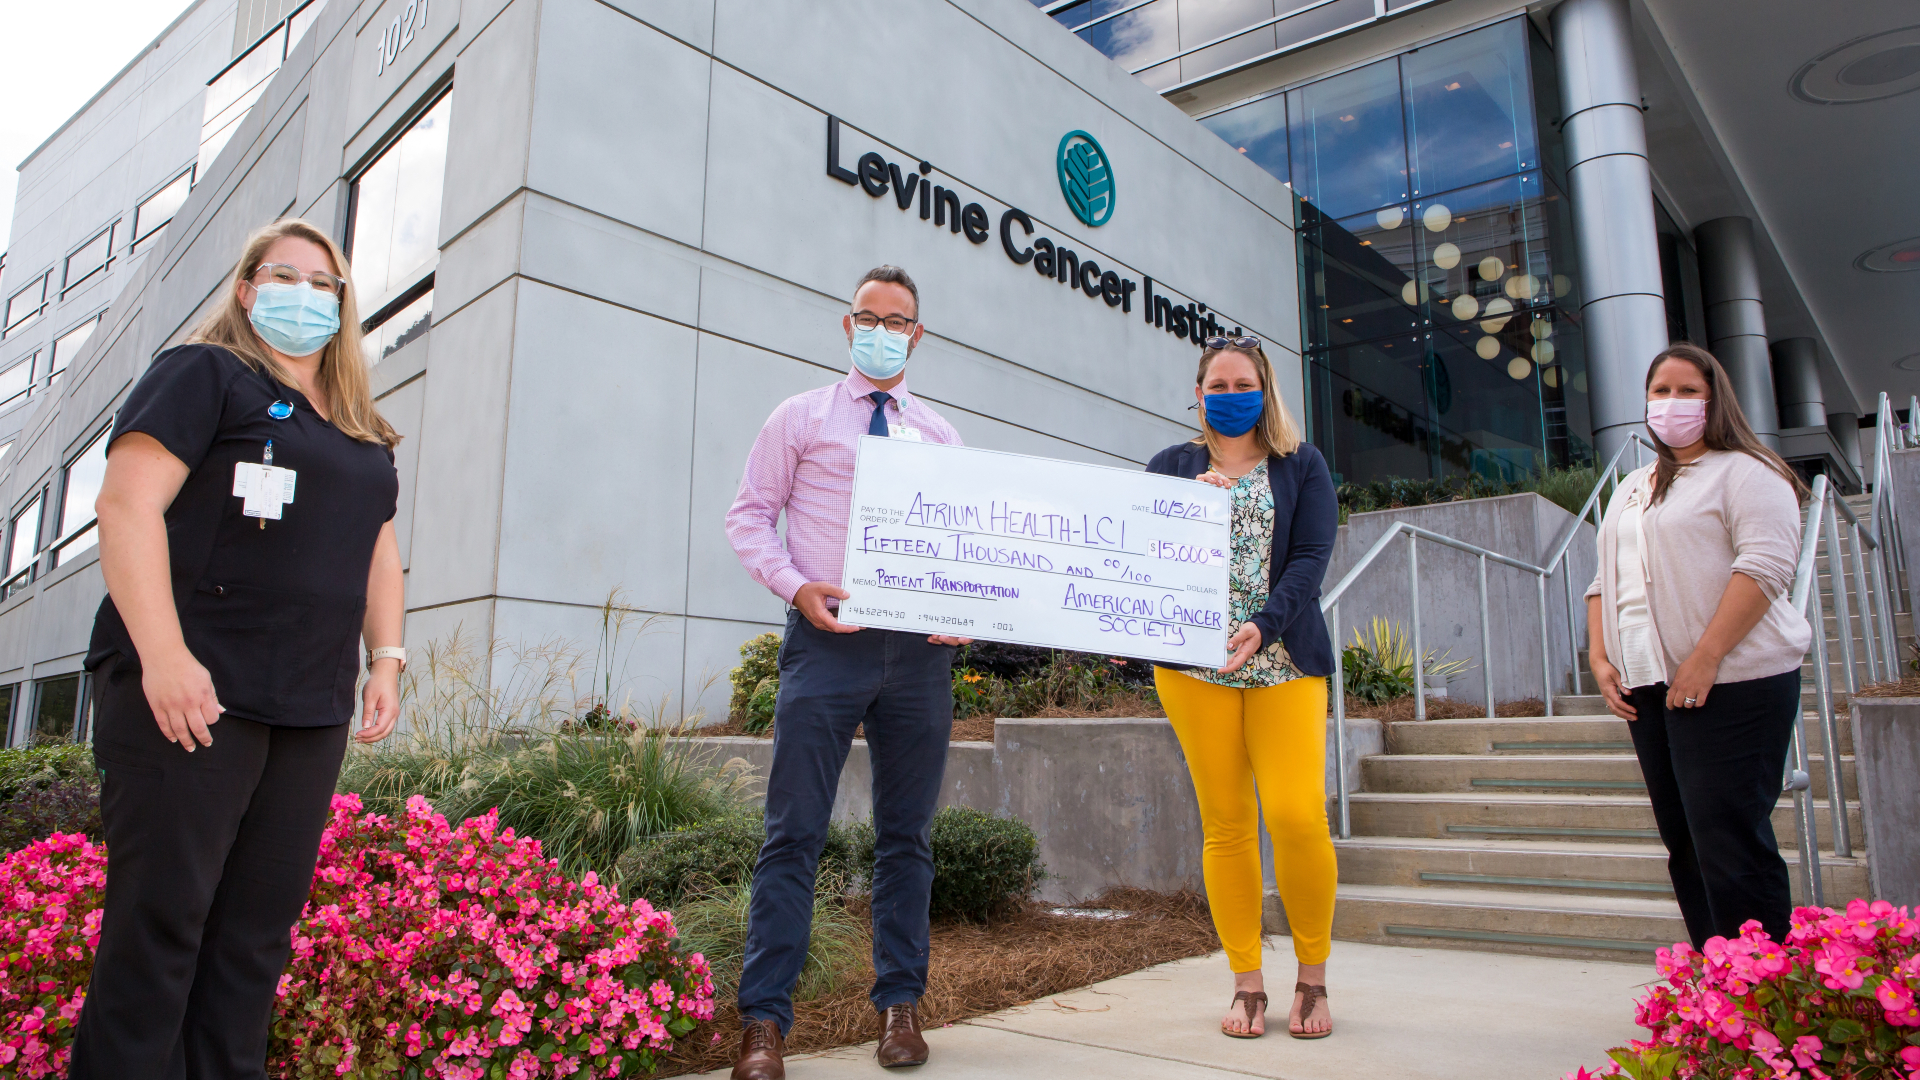 Atrium Health Levine Cancer Institute has been awarded a $15,000 grant from the American Cancer Society to address the transportation needs of cancer patients in the Charlotte region.